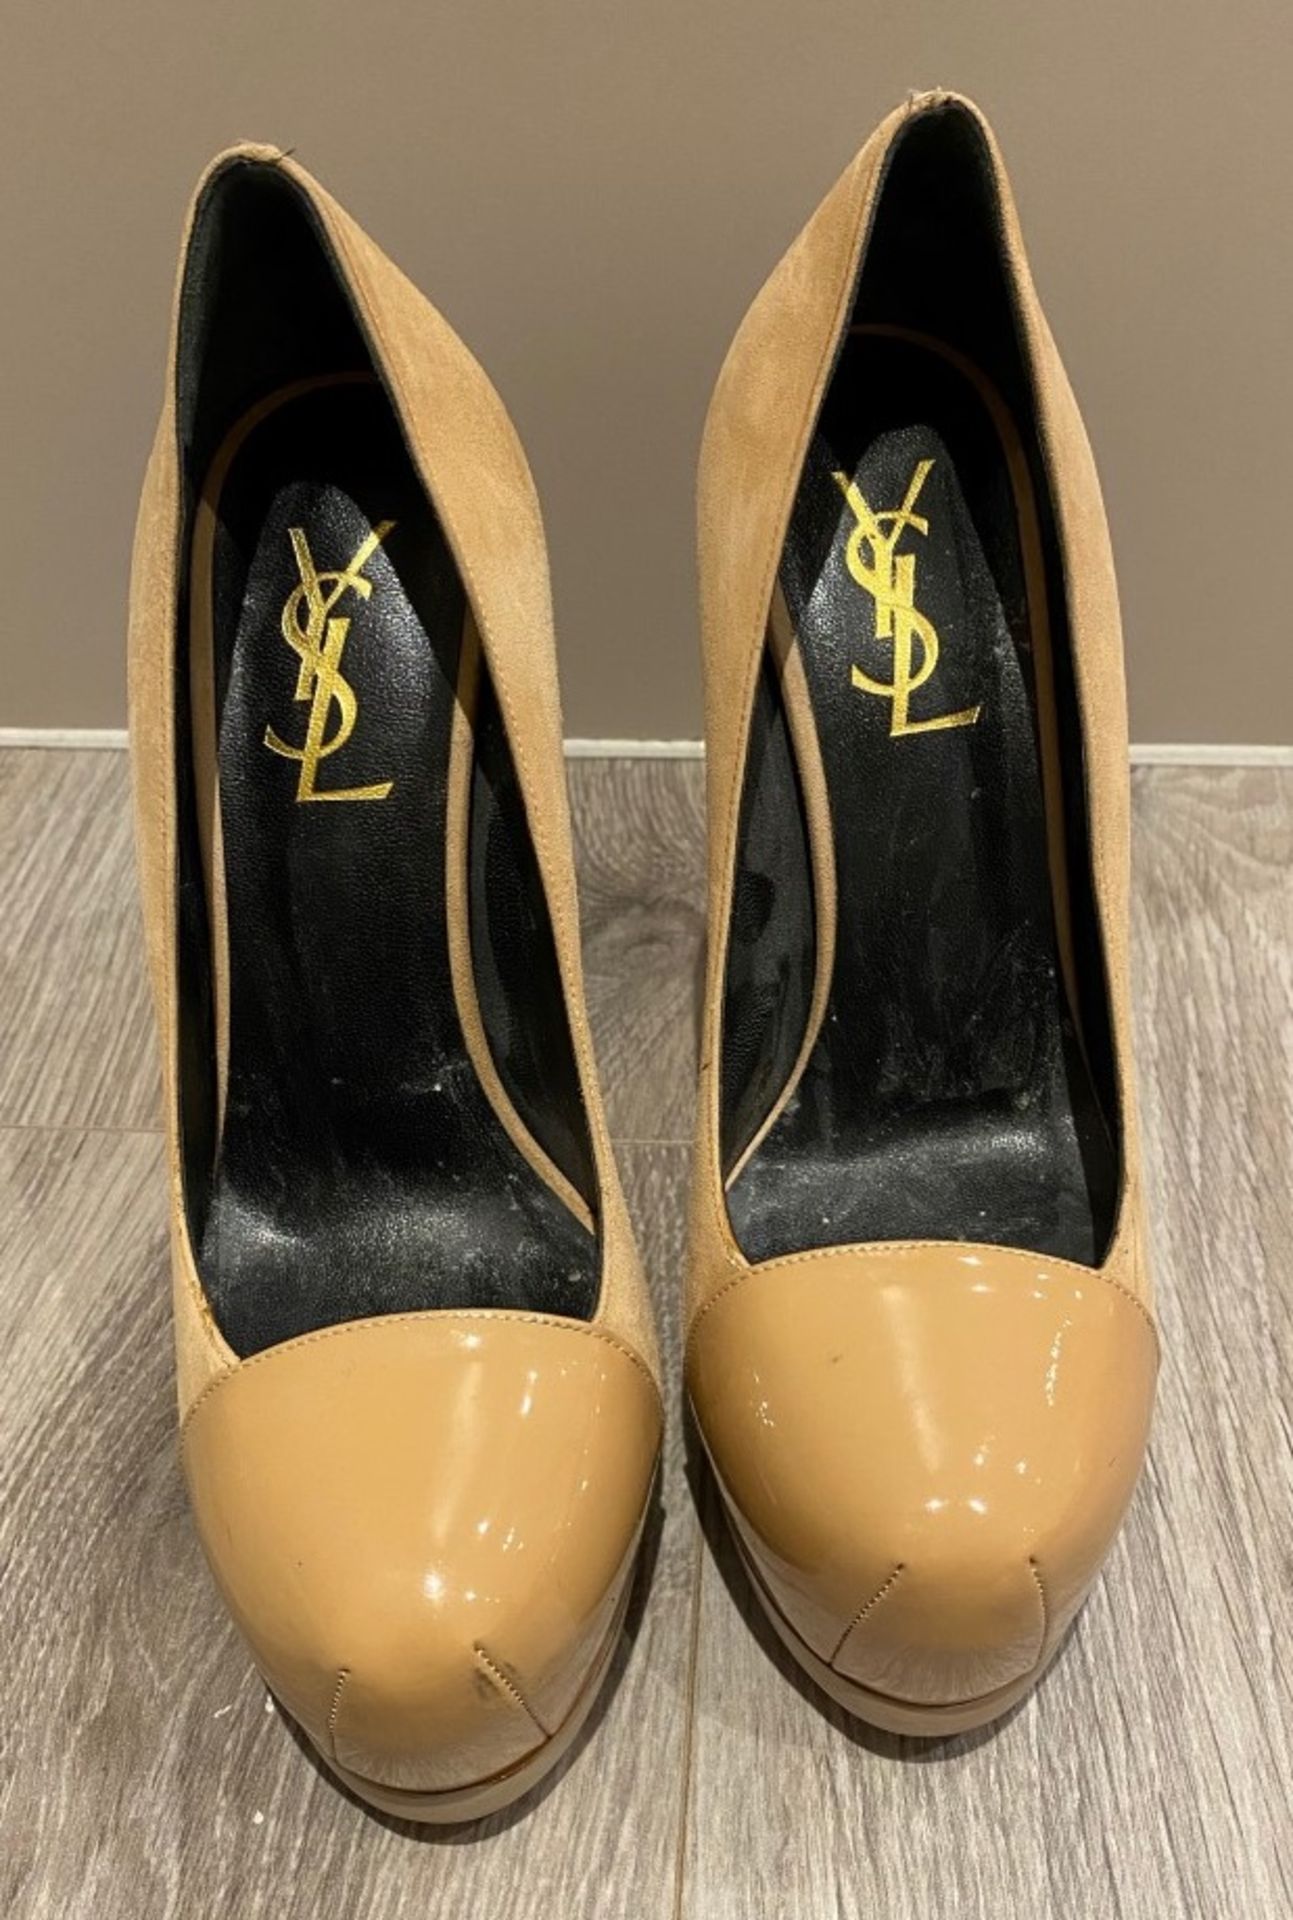 1 x Pair Of Genuine YSL High Heel Shoes In Light Beige - Size: 36 - Preowned in Very Good Condition - Image 4 of 4